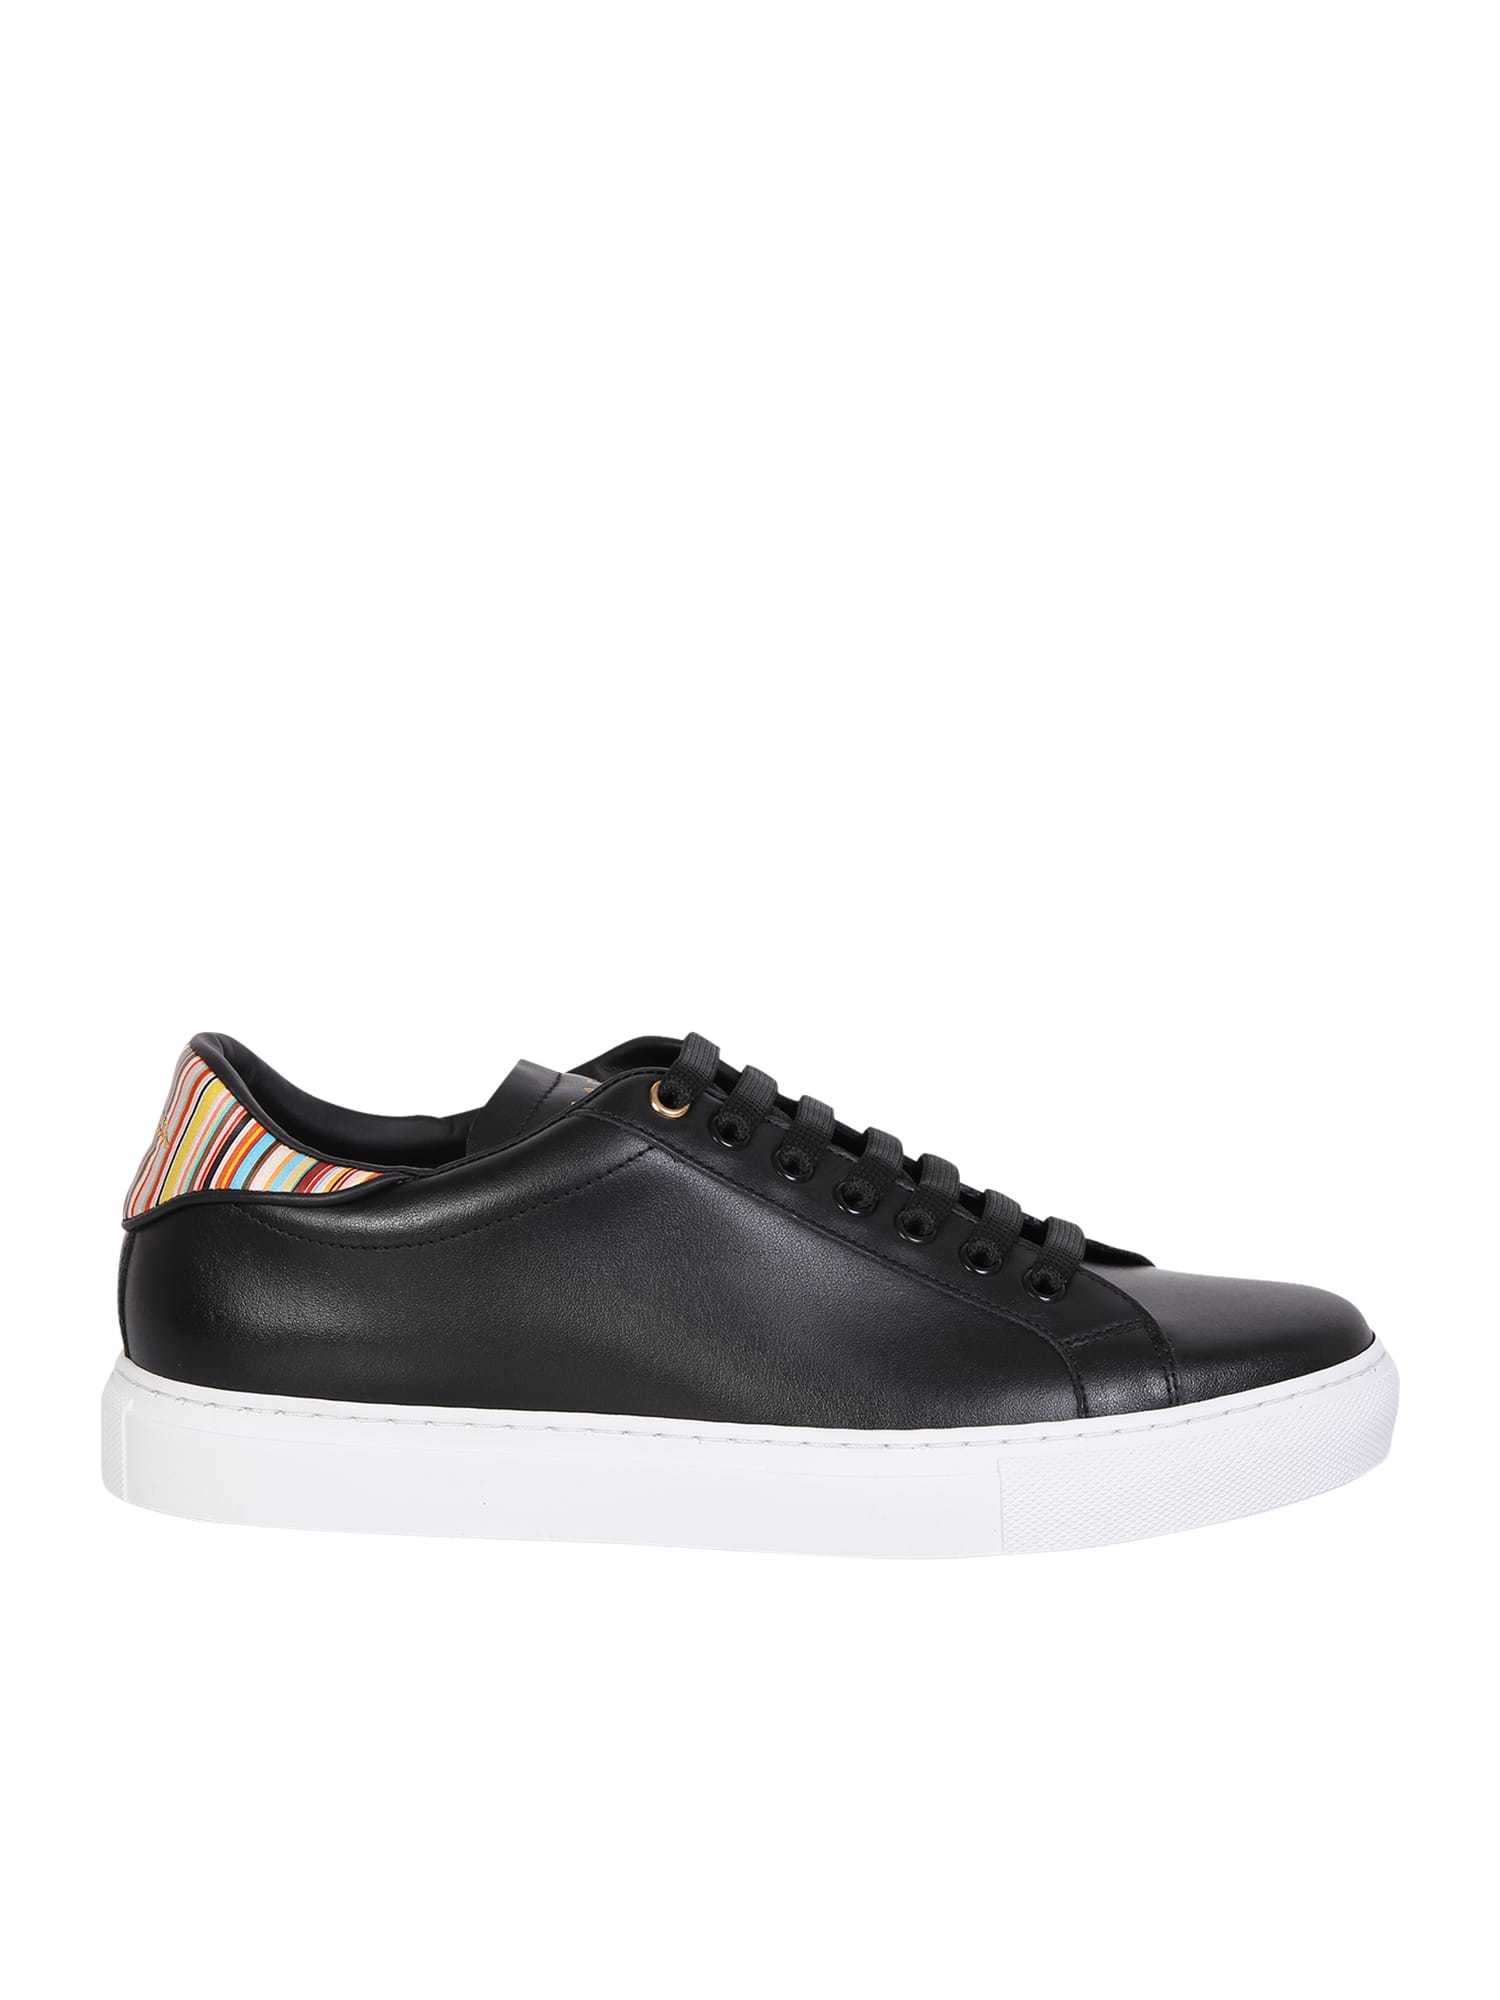 Paul Smith Black Leather Sneakers